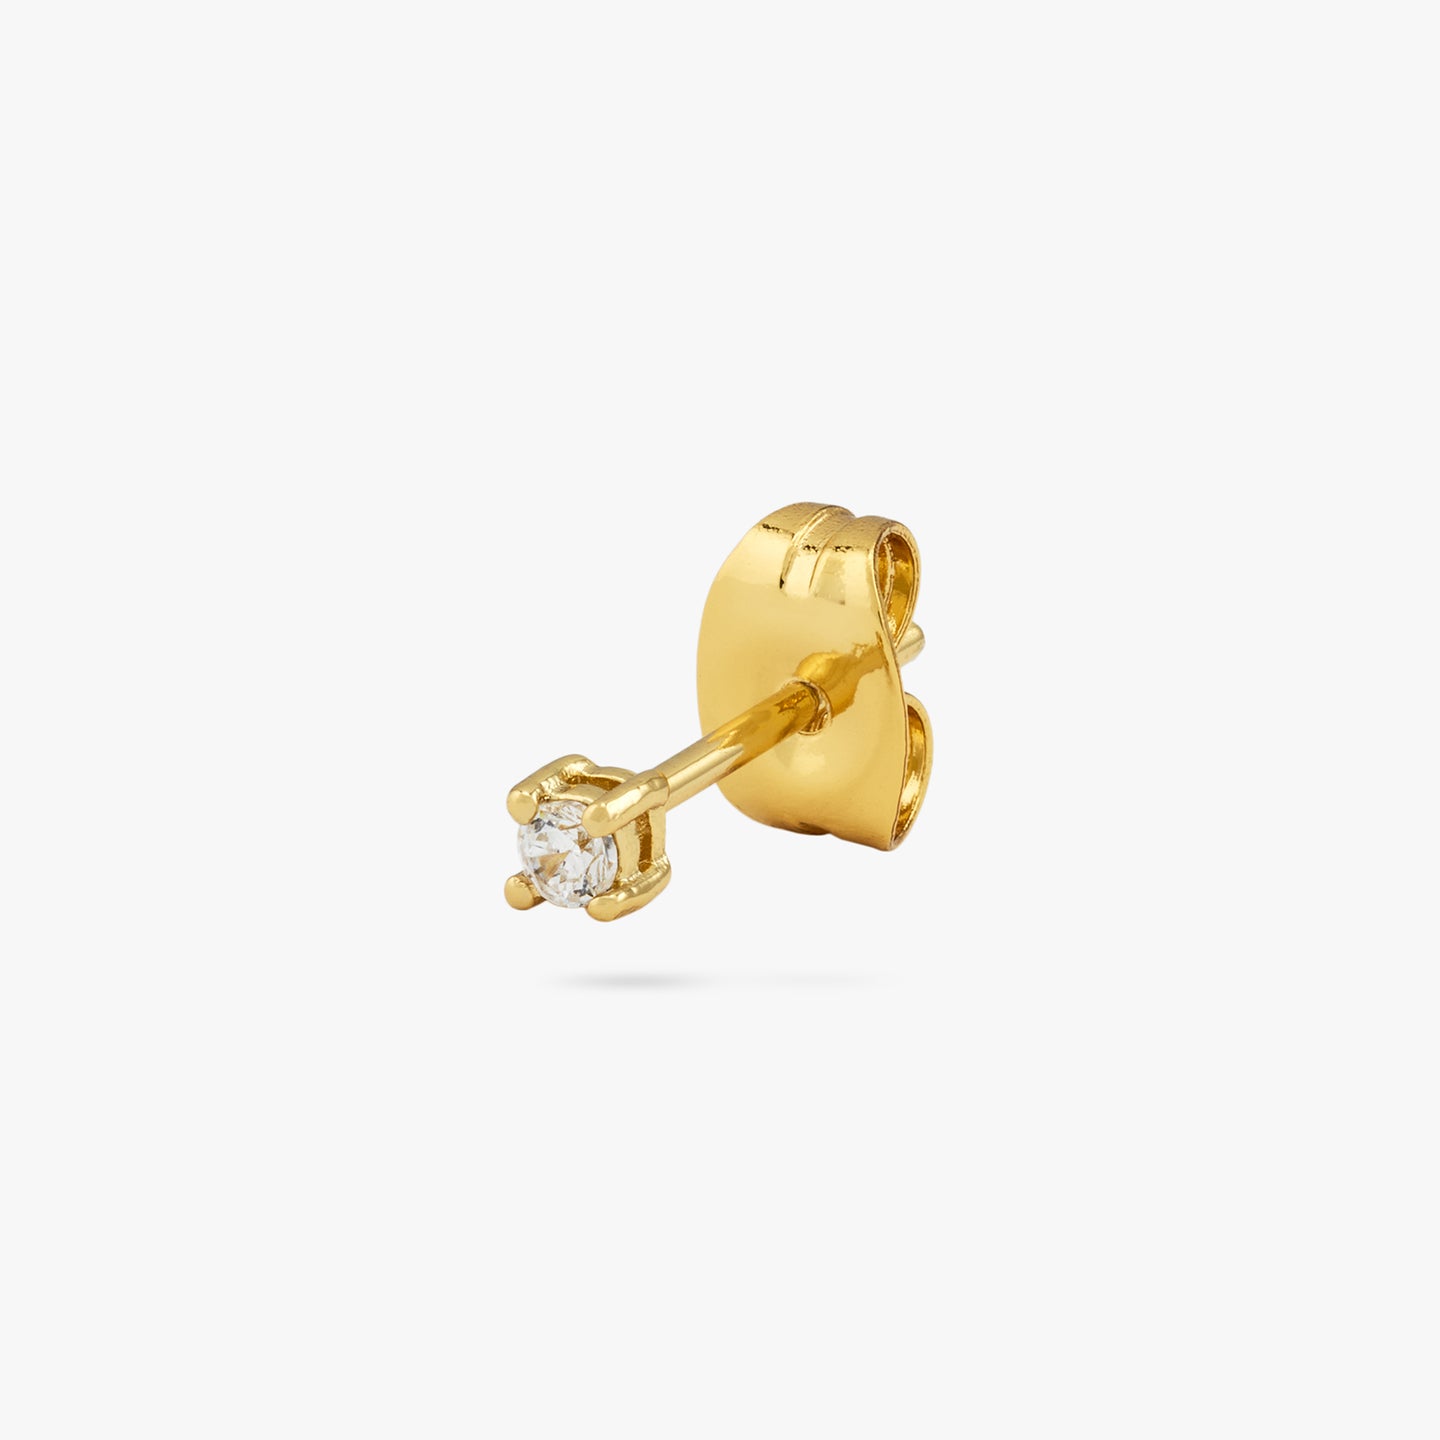 A mini gold stud with a clear cz gem color:null|gold/clear